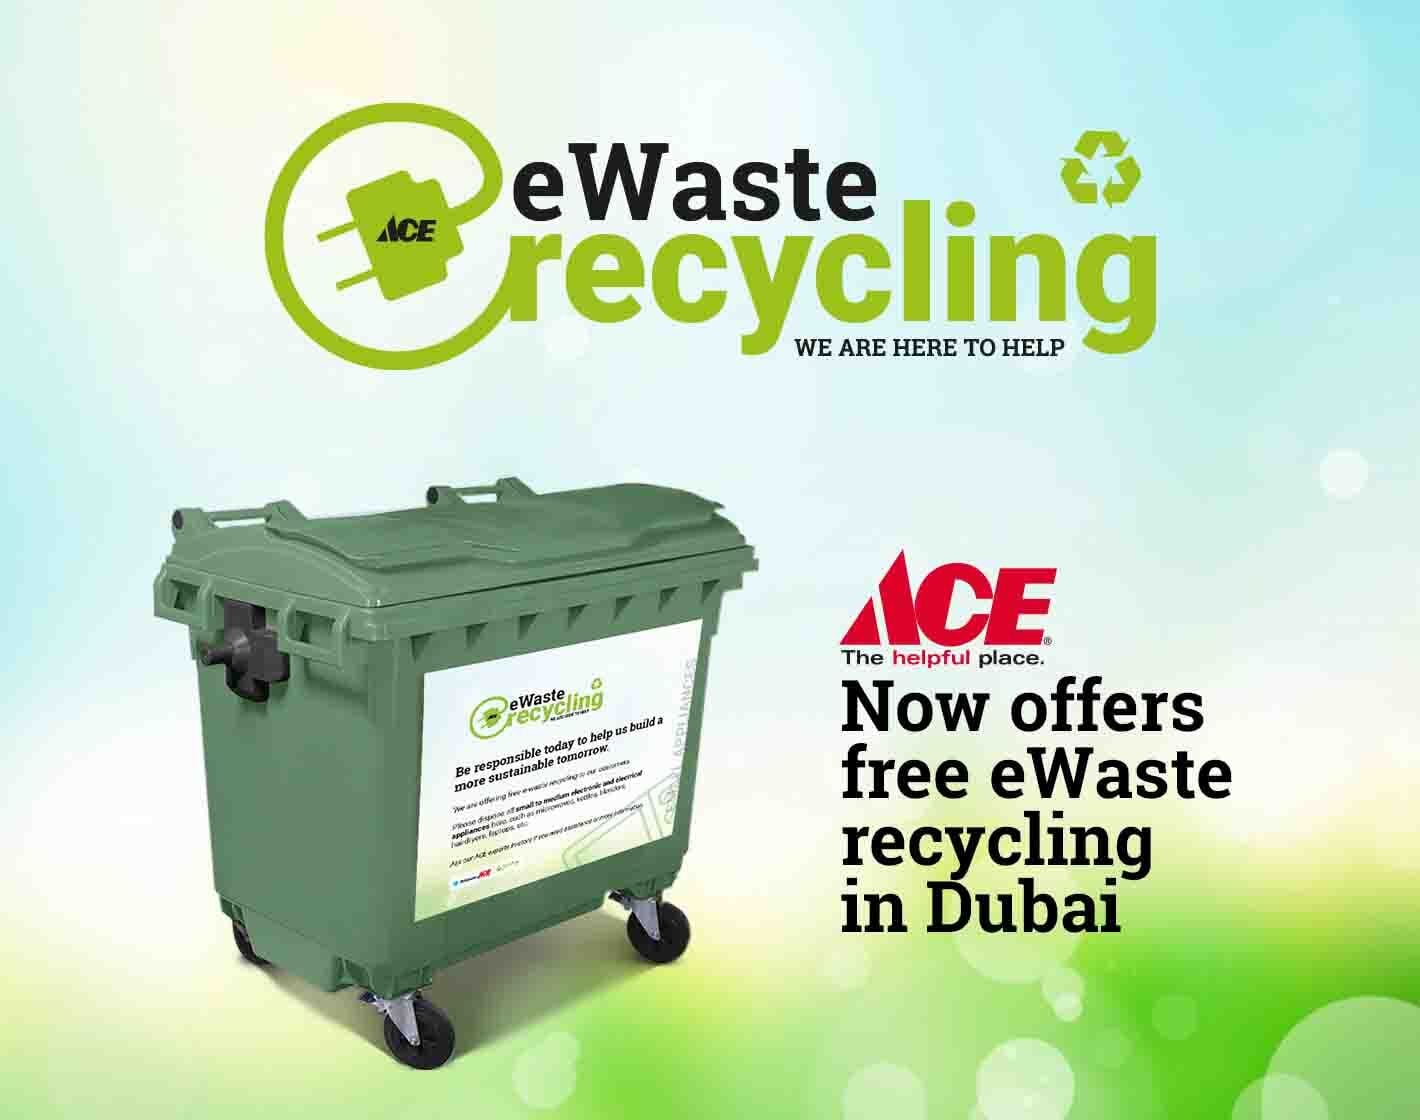 ACE now offers free eWaste recycling at Festival Plaza, Jebel Ali.